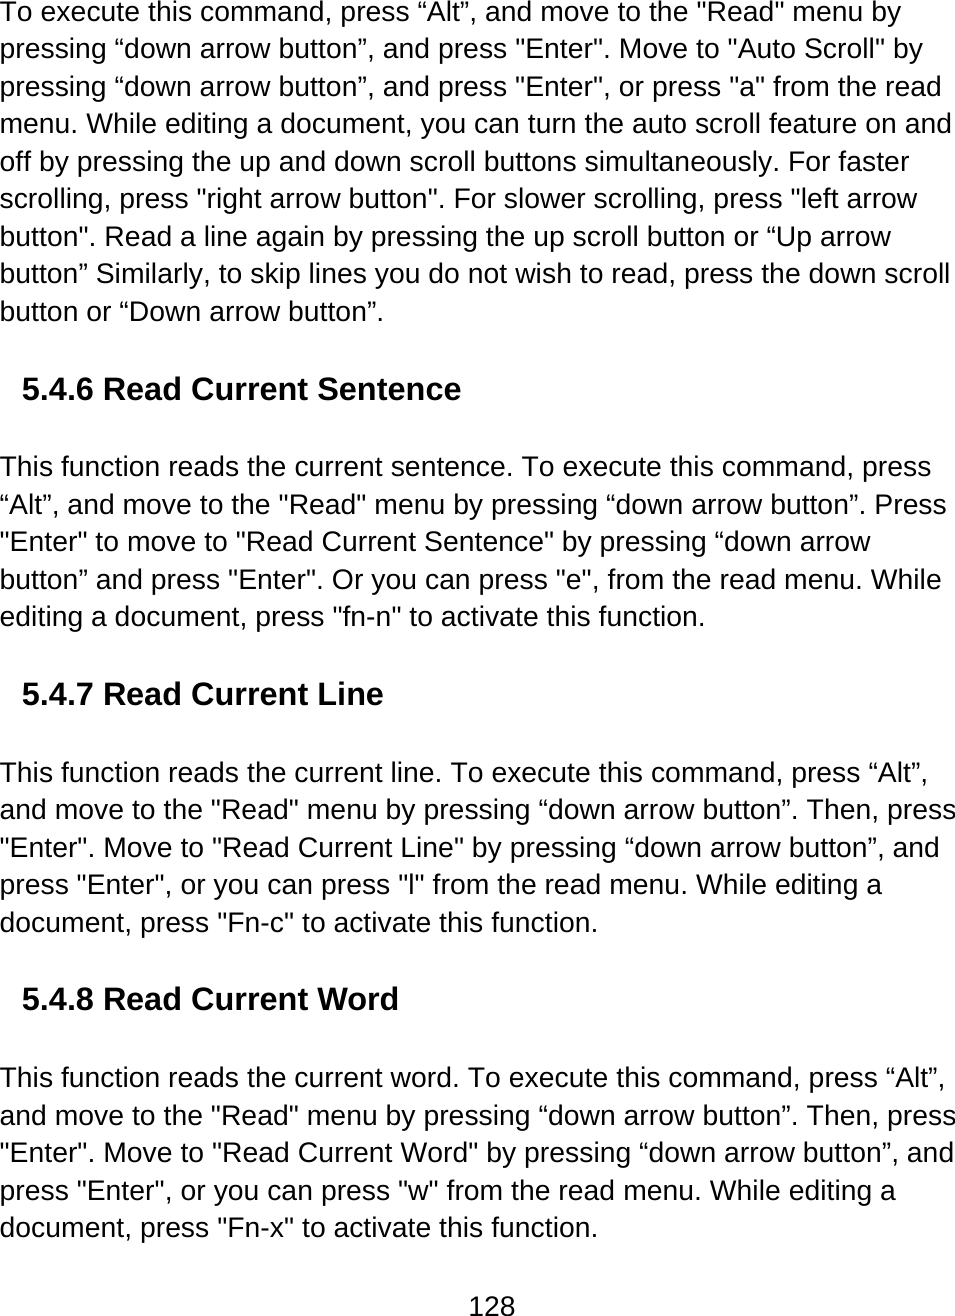 128  To execute this command, press “Alt”, and move to the &quot;Read&quot; menu by pressing “down arrow button”, and press &quot;Enter&quot;. Move to &quot;Auto Scroll&quot; by pressing “down arrow button”, and press &quot;Enter&quot;, or press &quot;a&quot; from the read menu. While editing a document, you can turn the auto scroll feature on and off by pressing the up and down scroll buttons simultaneously. For faster scrolling, press &quot;right arrow button&quot;. For slower scrolling, press &quot;left arrow button&quot;. Read a line again by pressing the up scroll button or “Up arrow button” Similarly, to skip lines you do not wish to read, press the down scroll button or “Down arrow button”.   5.4.6 Read Current Sentence  This function reads the current sentence. To execute this command, press “Alt”, and move to the &quot;Read&quot; menu by pressing “down arrow button”. Press &quot;Enter&quot; to move to &quot;Read Current Sentence&quot; by pressing “down arrow button” and press &quot;Enter&quot;. Or you can press &quot;e&quot;, from the read menu. While editing a document, press &quot;fn-n&quot; to activate this function.    5.4.7 Read Current Line  This function reads the current line. To execute this command, press “Alt”, and move to the &quot;Read&quot; menu by pressing “down arrow button”. Then, press &quot;Enter&quot;. Move to &quot;Read Current Line&quot; by pressing “down arrow button”, and press &quot;Enter&quot;, or you can press &quot;l&quot; from the read menu. While editing a document, press &quot;Fn-c&quot; to activate this function.    5.4.8 Read Current Word  This function reads the current word. To execute this command, press “Alt”, and move to the &quot;Read&quot; menu by pressing “down arrow button”. Then, press &quot;Enter&quot;. Move to &quot;Read Current Word&quot; by pressing “down arrow button”, and press &quot;Enter&quot;, or you can press &quot;w&quot; from the read menu. While editing a document, press &quot;Fn-x&quot; to activate this function.   